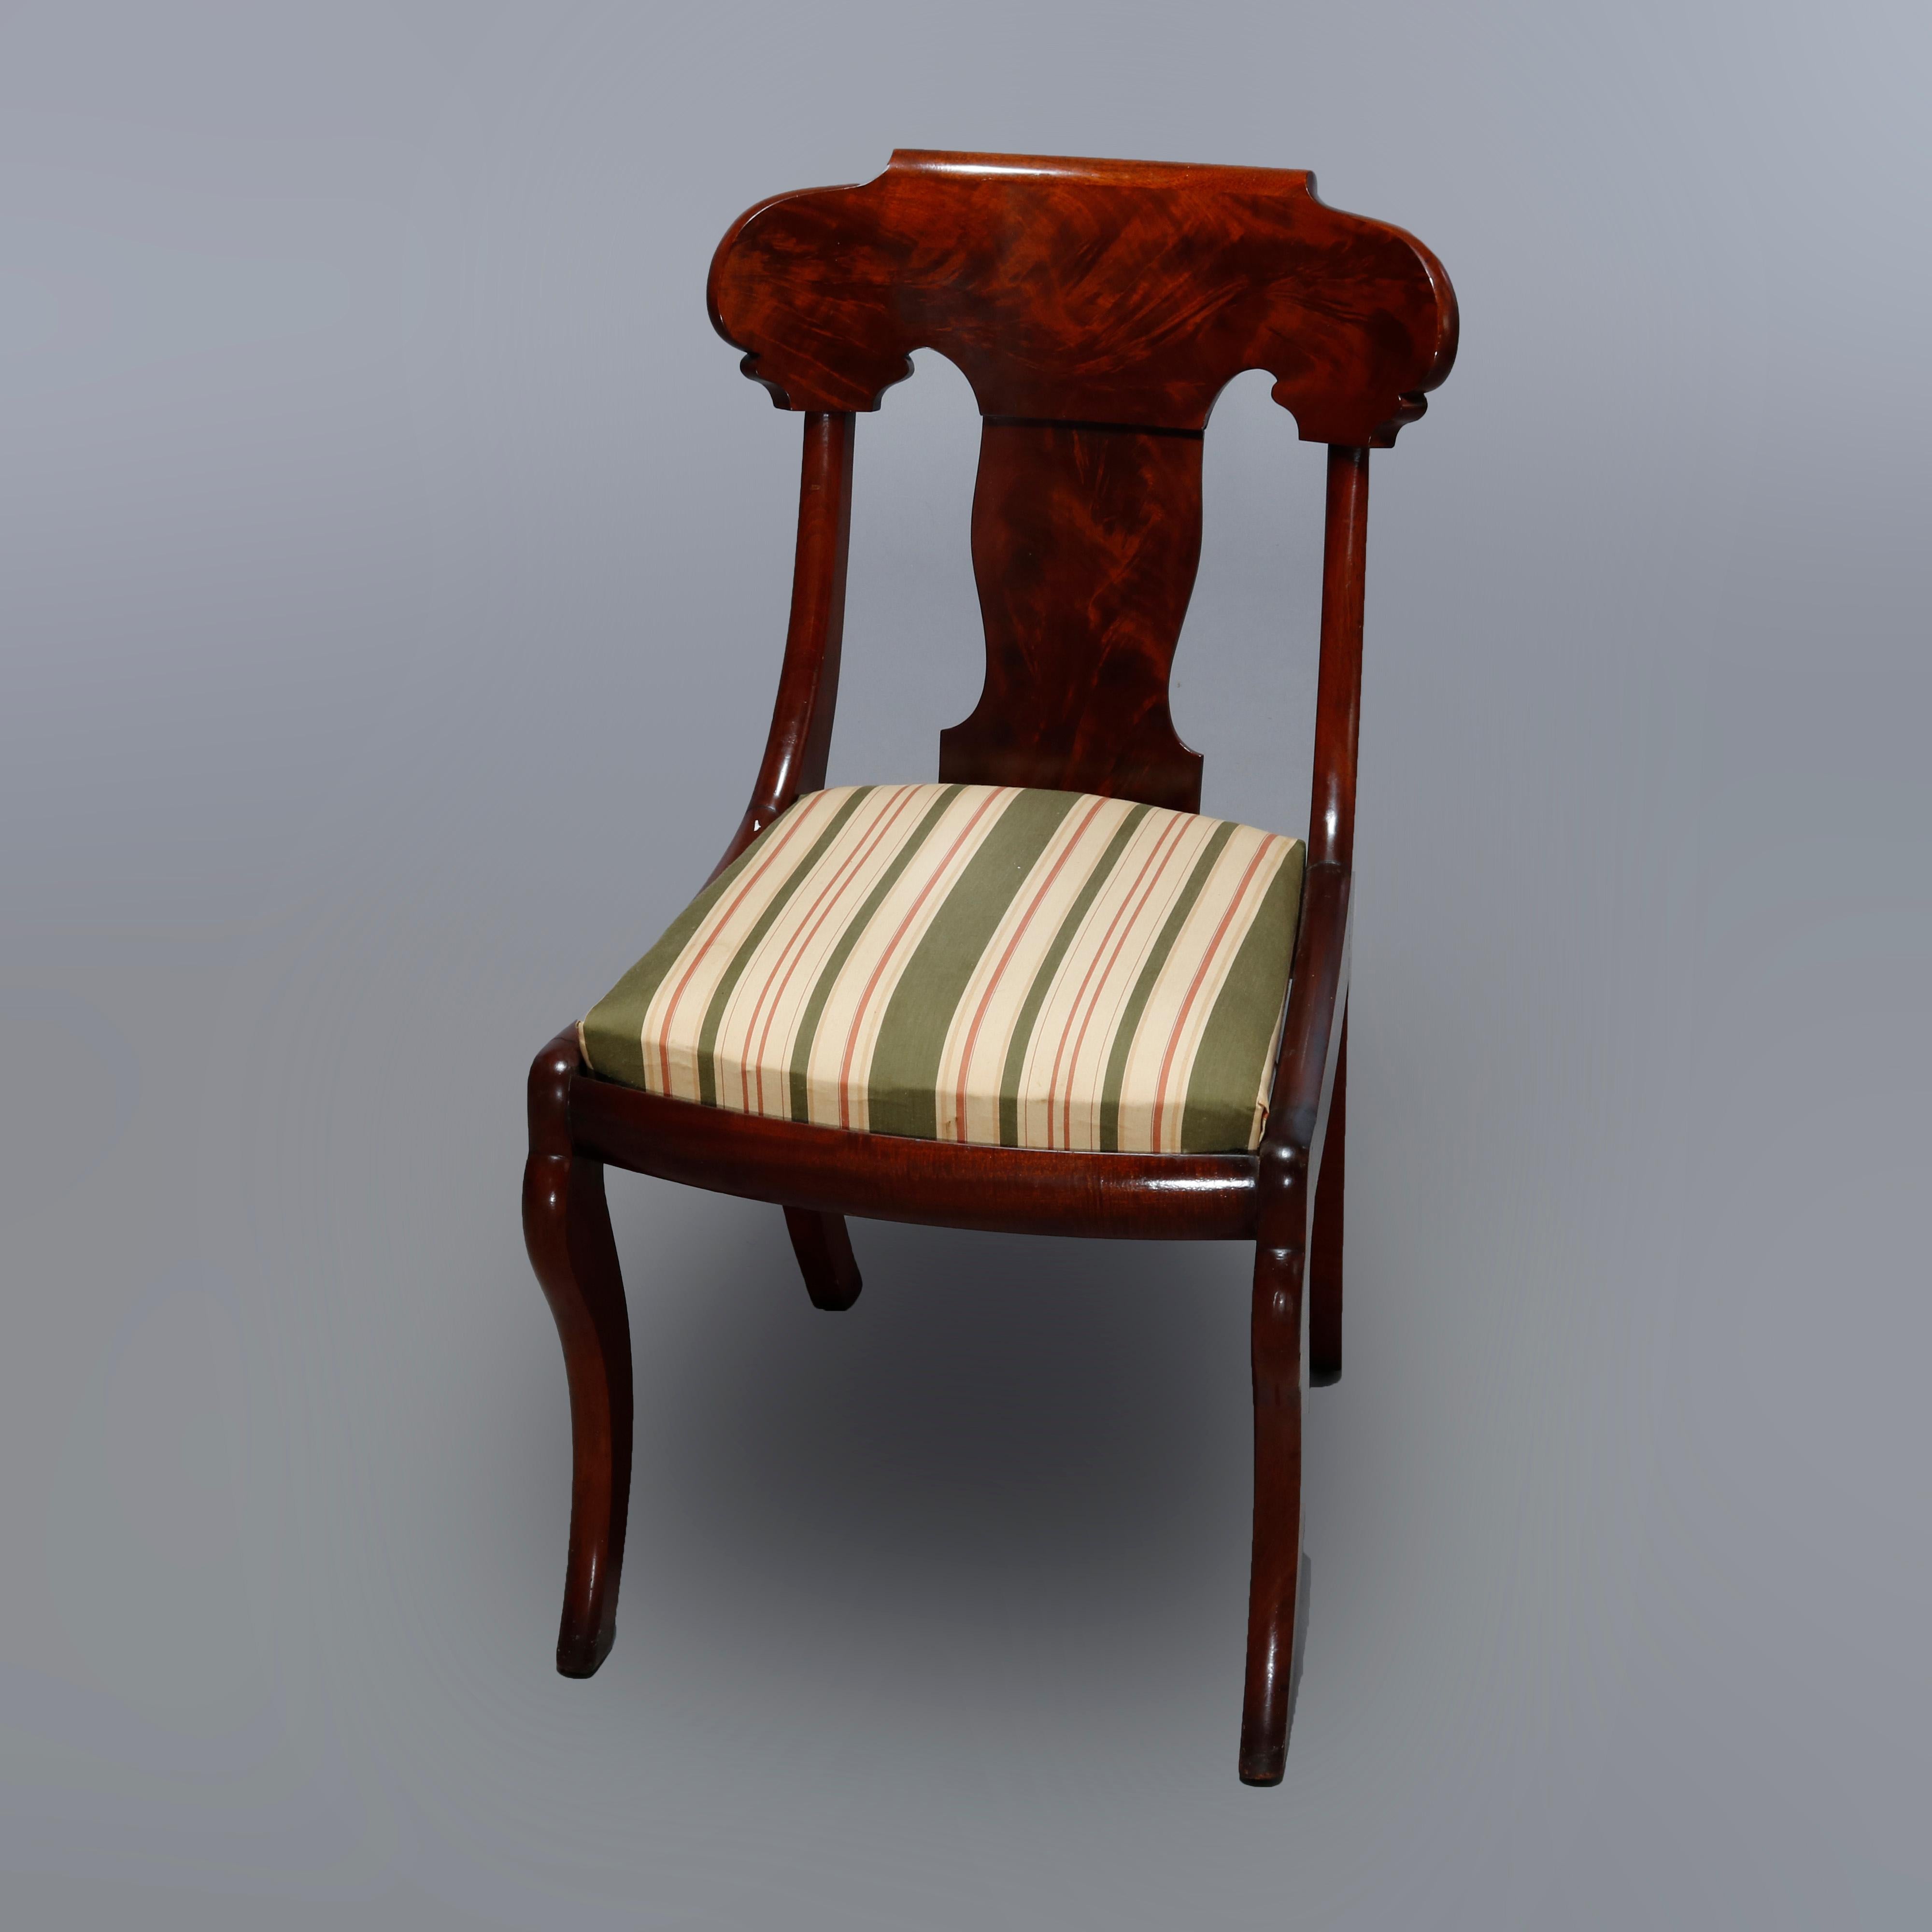 An antique set of six dining chairs offer flame mahogany construction in gondola form raised on saber legs, 19th century

Measures: 32.25